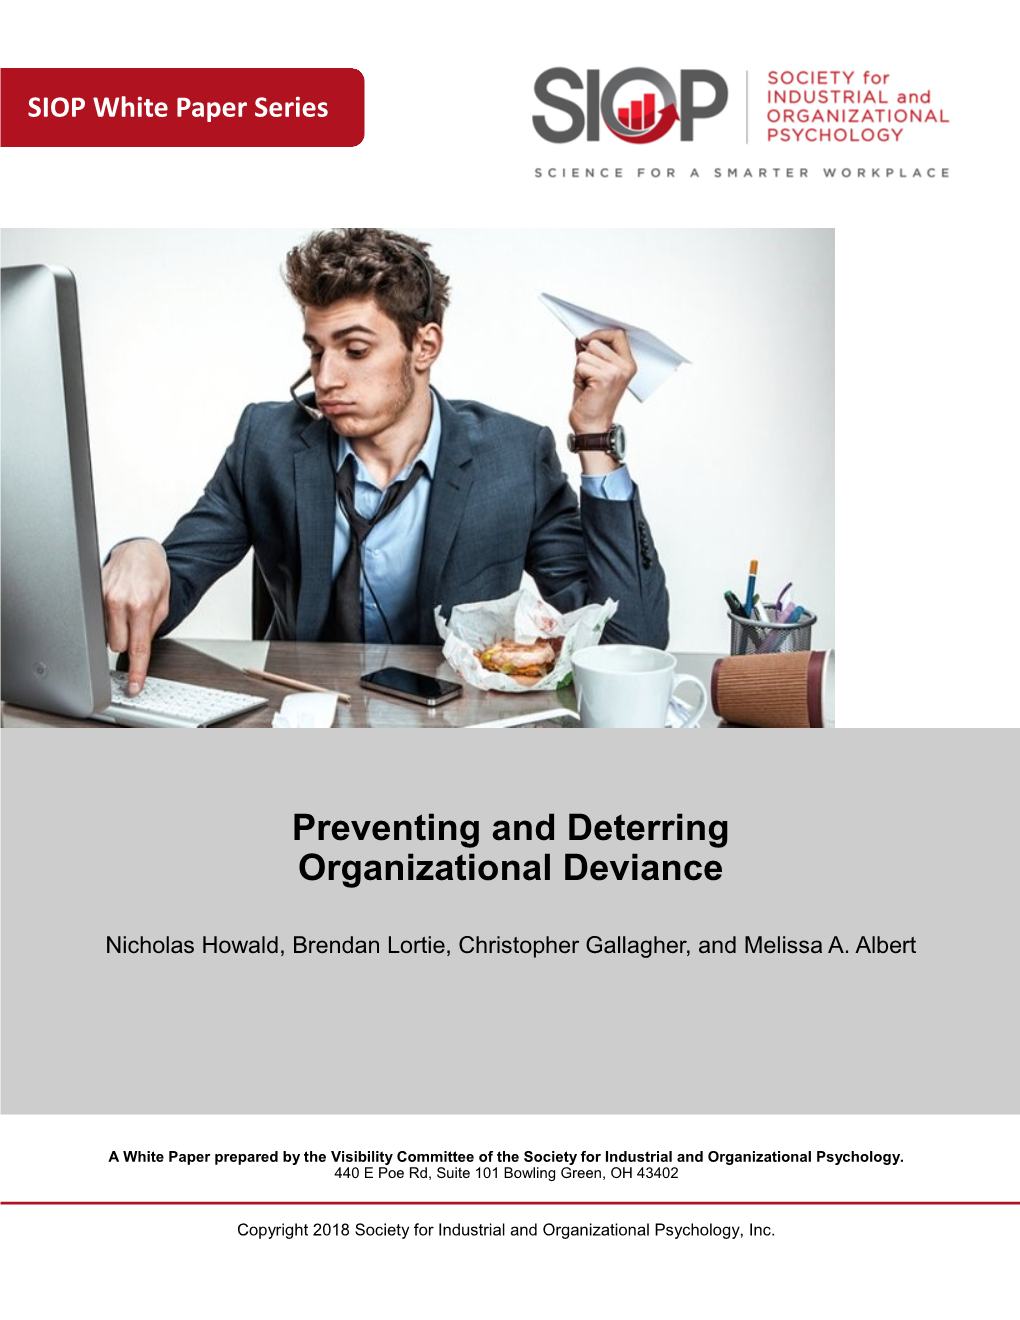 Preventing and Deterring Organizational Deviance